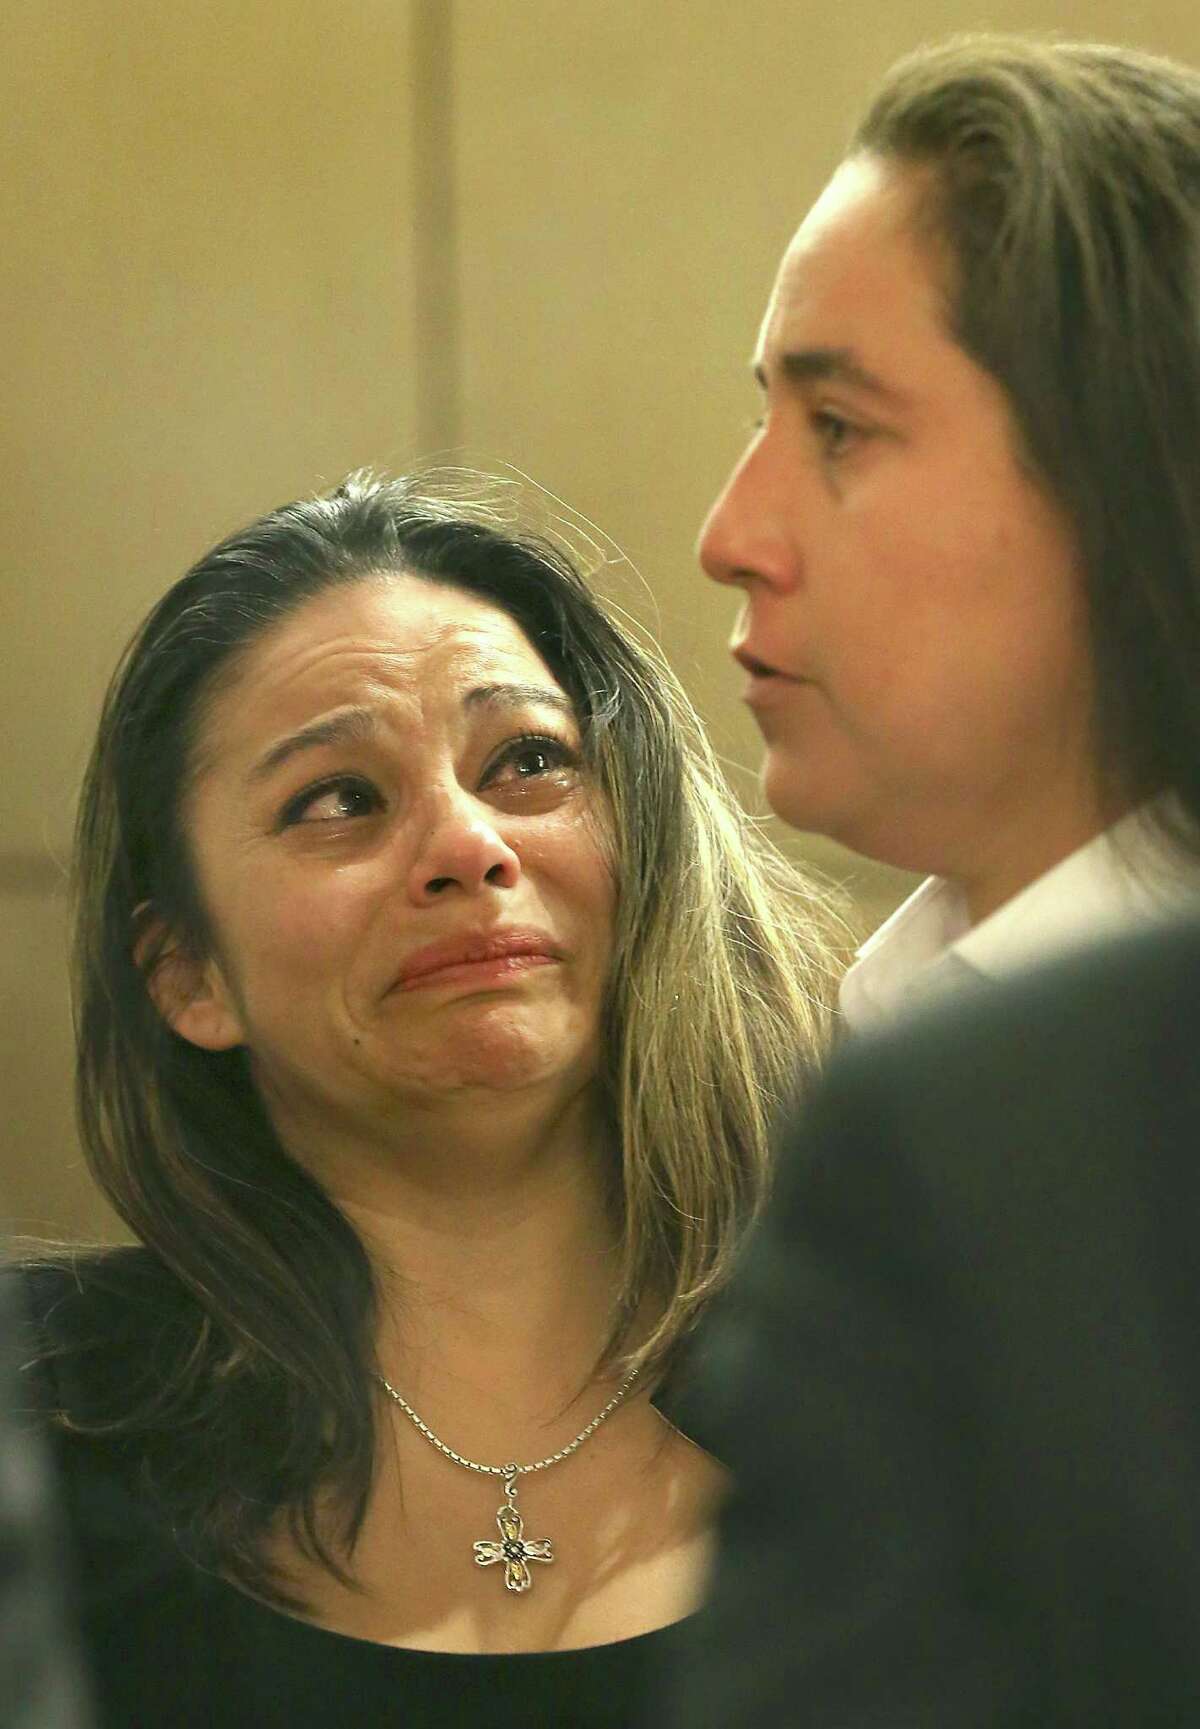 Elizabeth Ramirez, left, looks up to Anna Vasquez for reasuring words at the end of the second day of hearings for the SA Four, Anna Vasquez, Elizabeth Ramirez, Kristie Mayhugh and Cassandra Rivera. They were back in Bexar County Court to determine if they should be declared actually innocent of a sexual crime that they were found guilty of, or possibly sent back to prison. Ramirez could face having to finish out her sentence of 20 more years. Thursday, April 23, 2015.